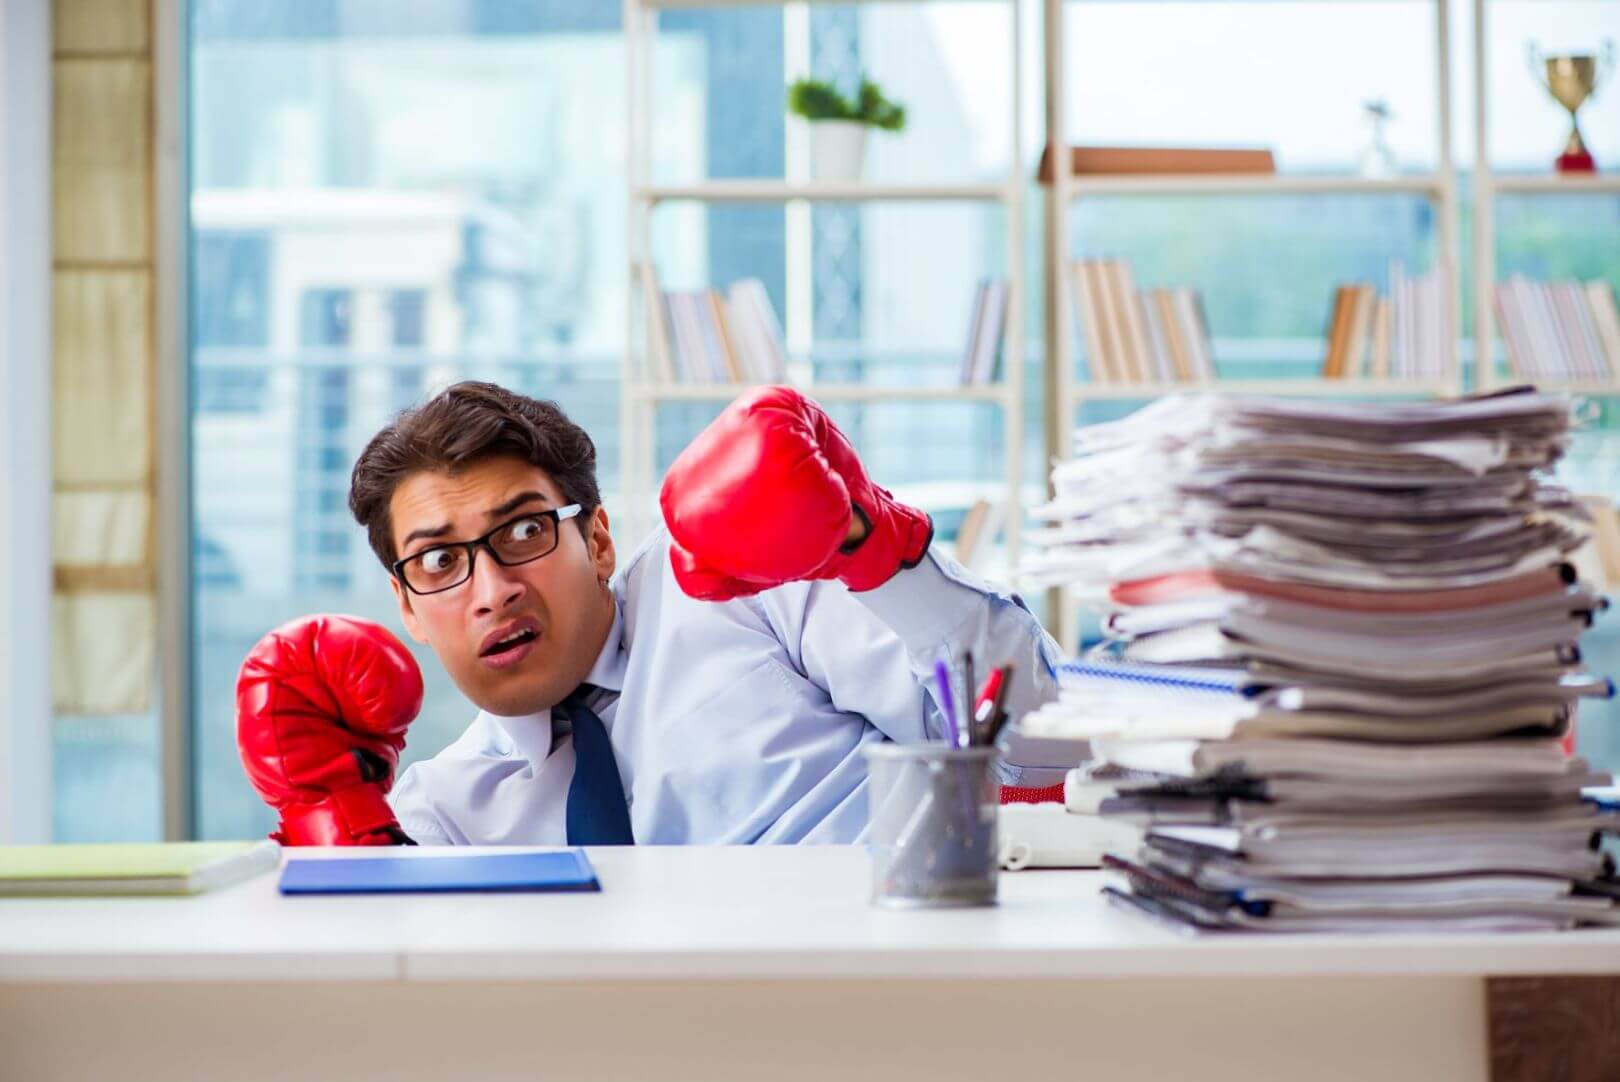 Silly photograph of man with boxing gloves looking intimidated by imposing stack of paperwork